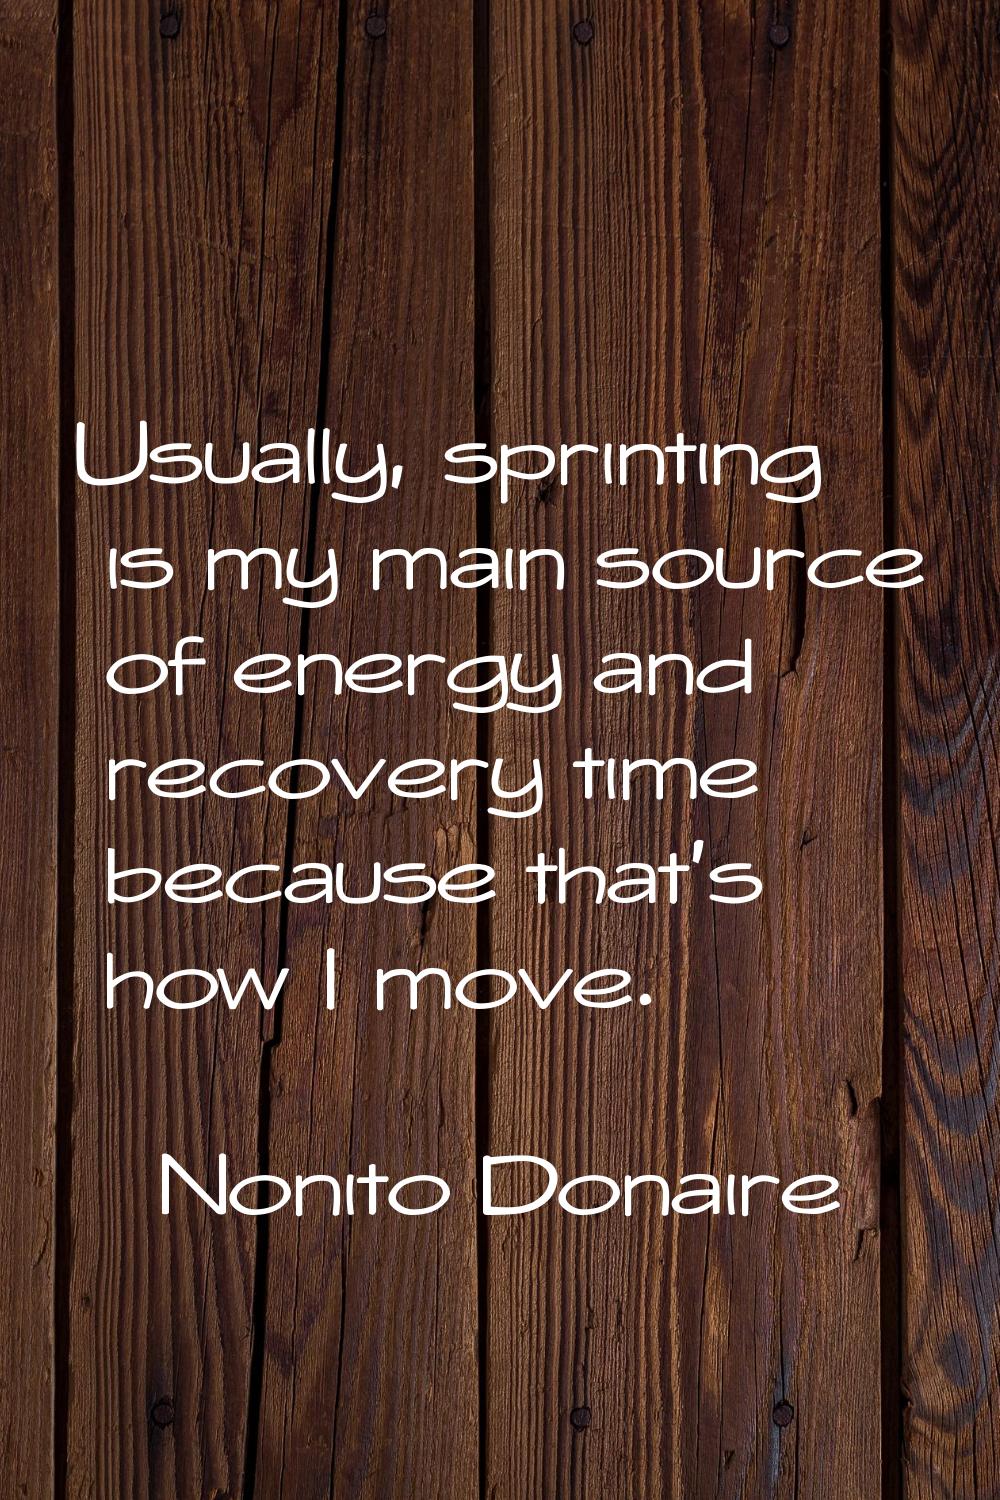 Usually, sprinting is my main source of energy and recovery time because that's how I move.